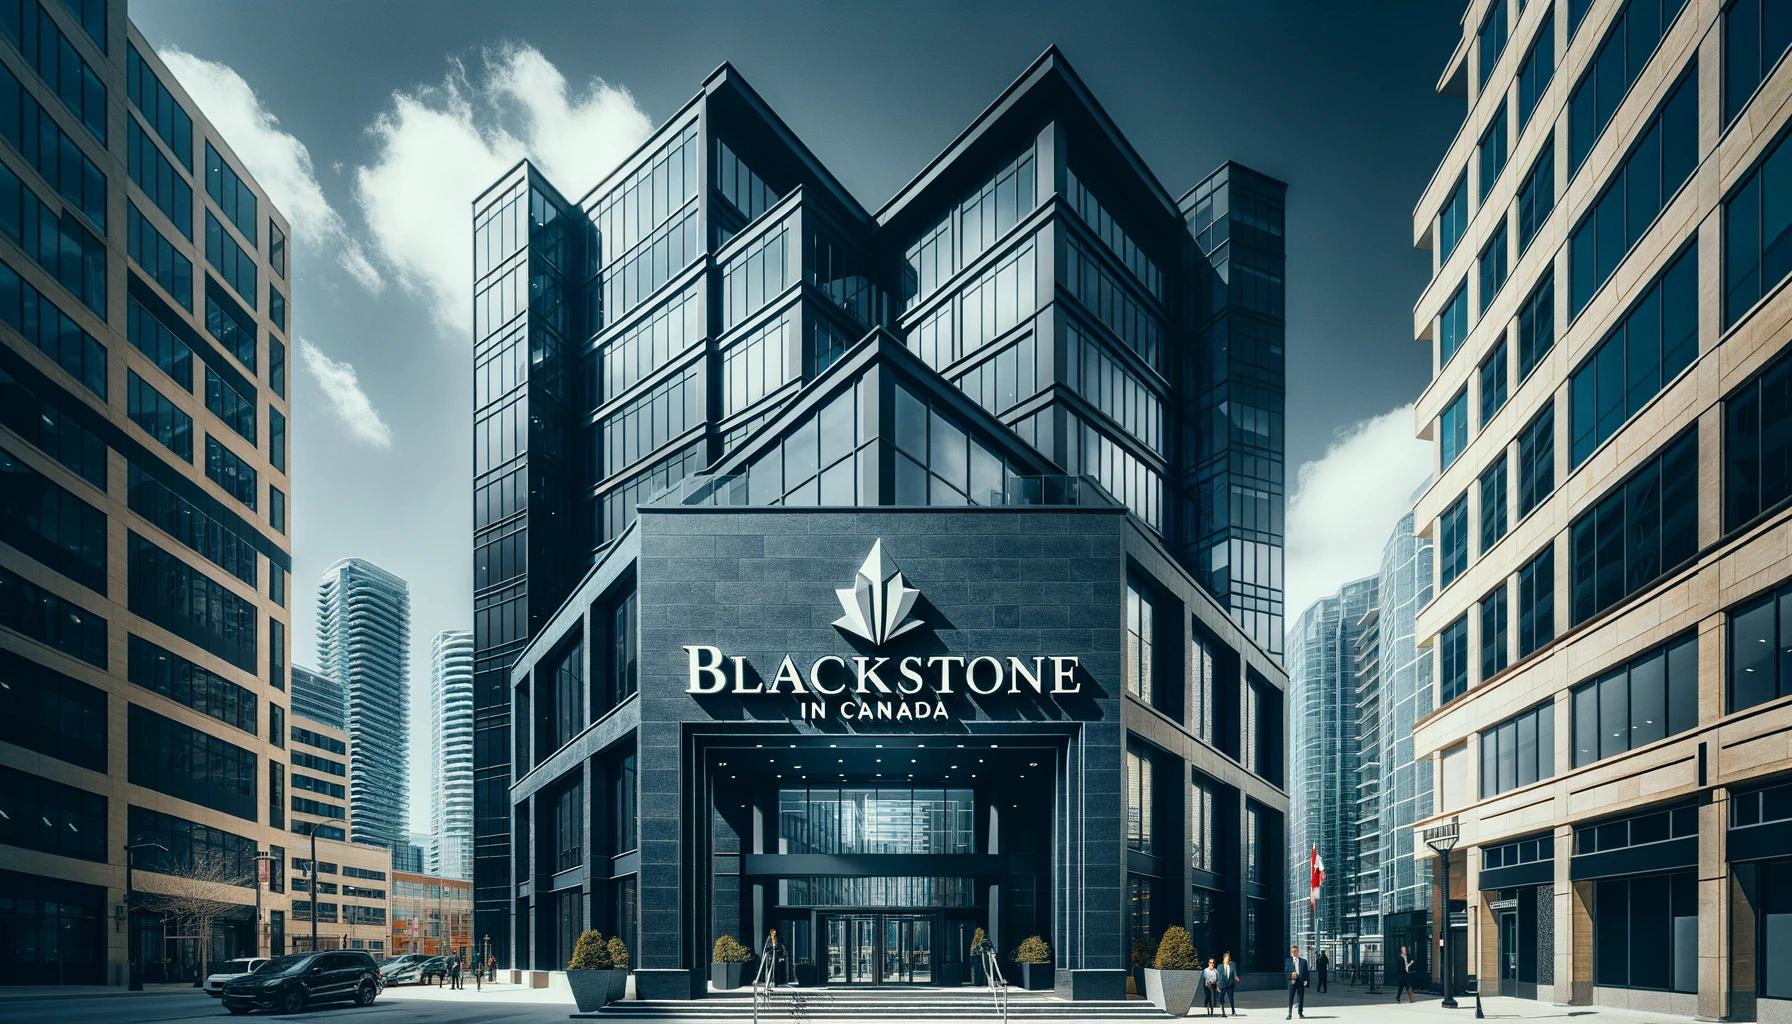 Modern office building in downtown Toronto with the Blackstone logo prominently displayed at the entrance.